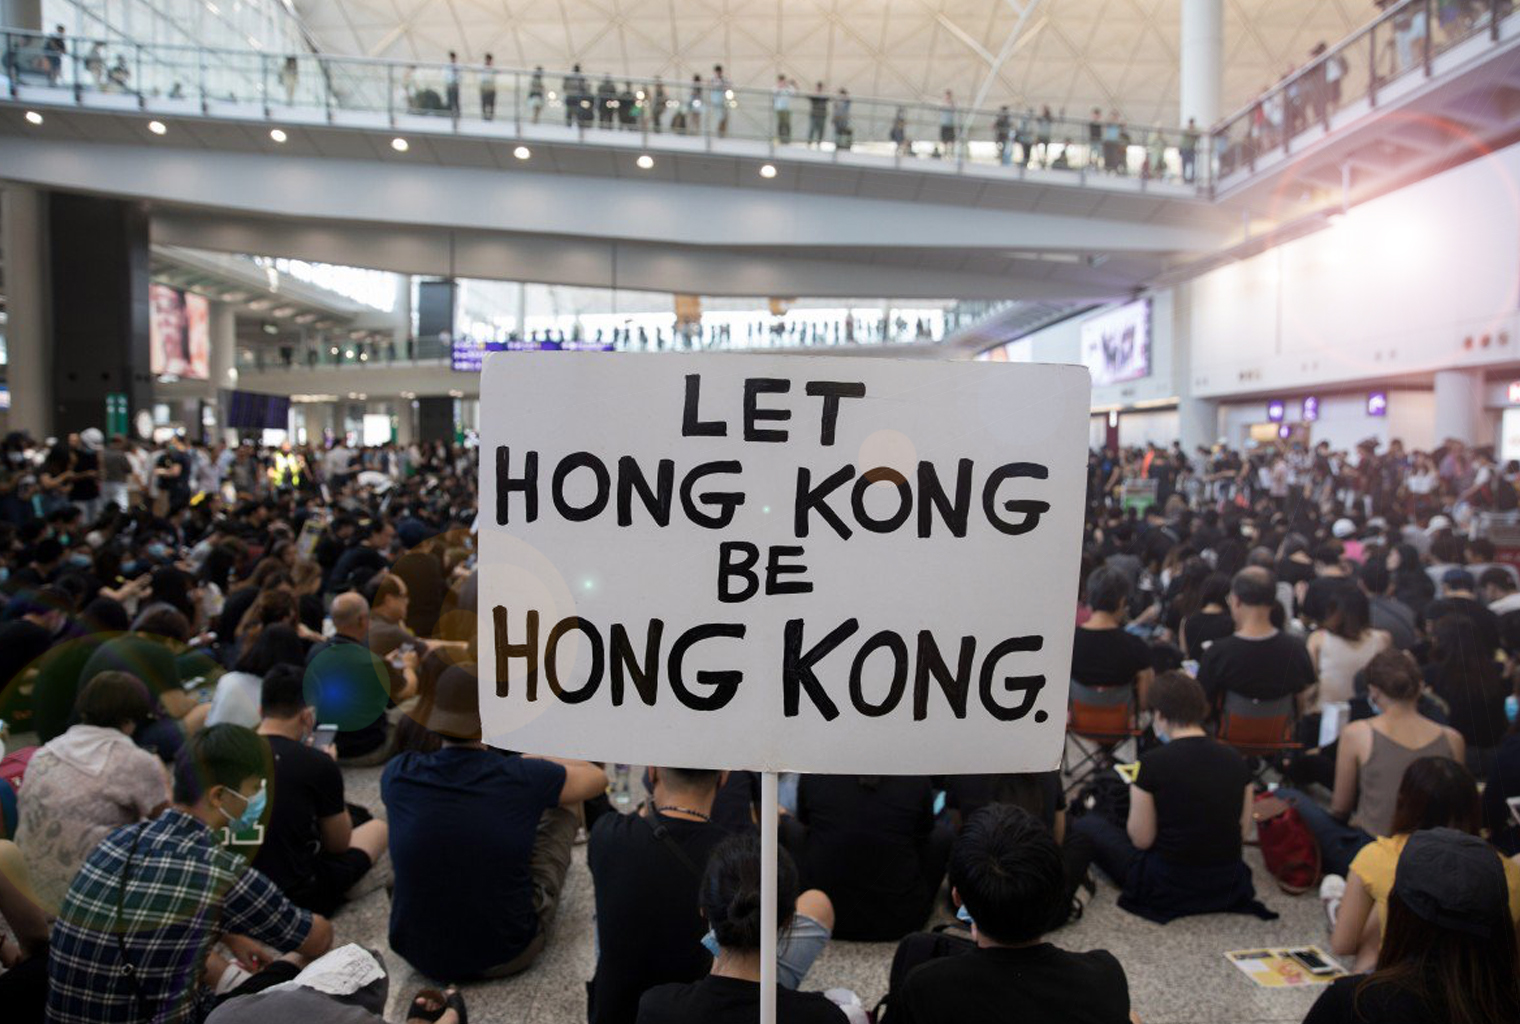 Hong Kong Protest Leader Hopes to Incite Run on Chinese Banks